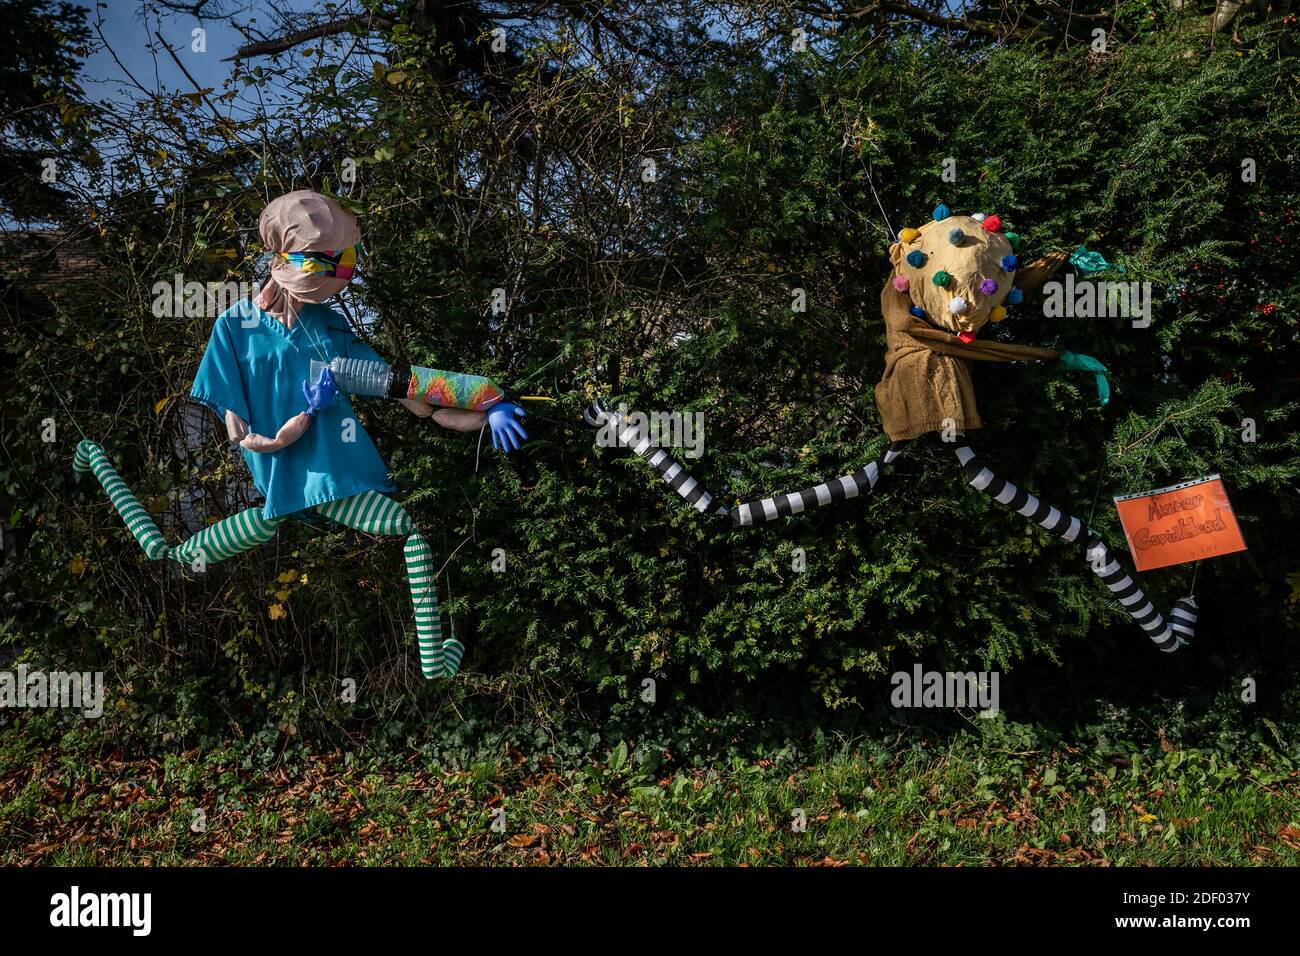 Coronavirus: Lockdown scarecrow characters bring some local homemade humour to the town of Marston Magna in Somerset, UK. Stock Photo